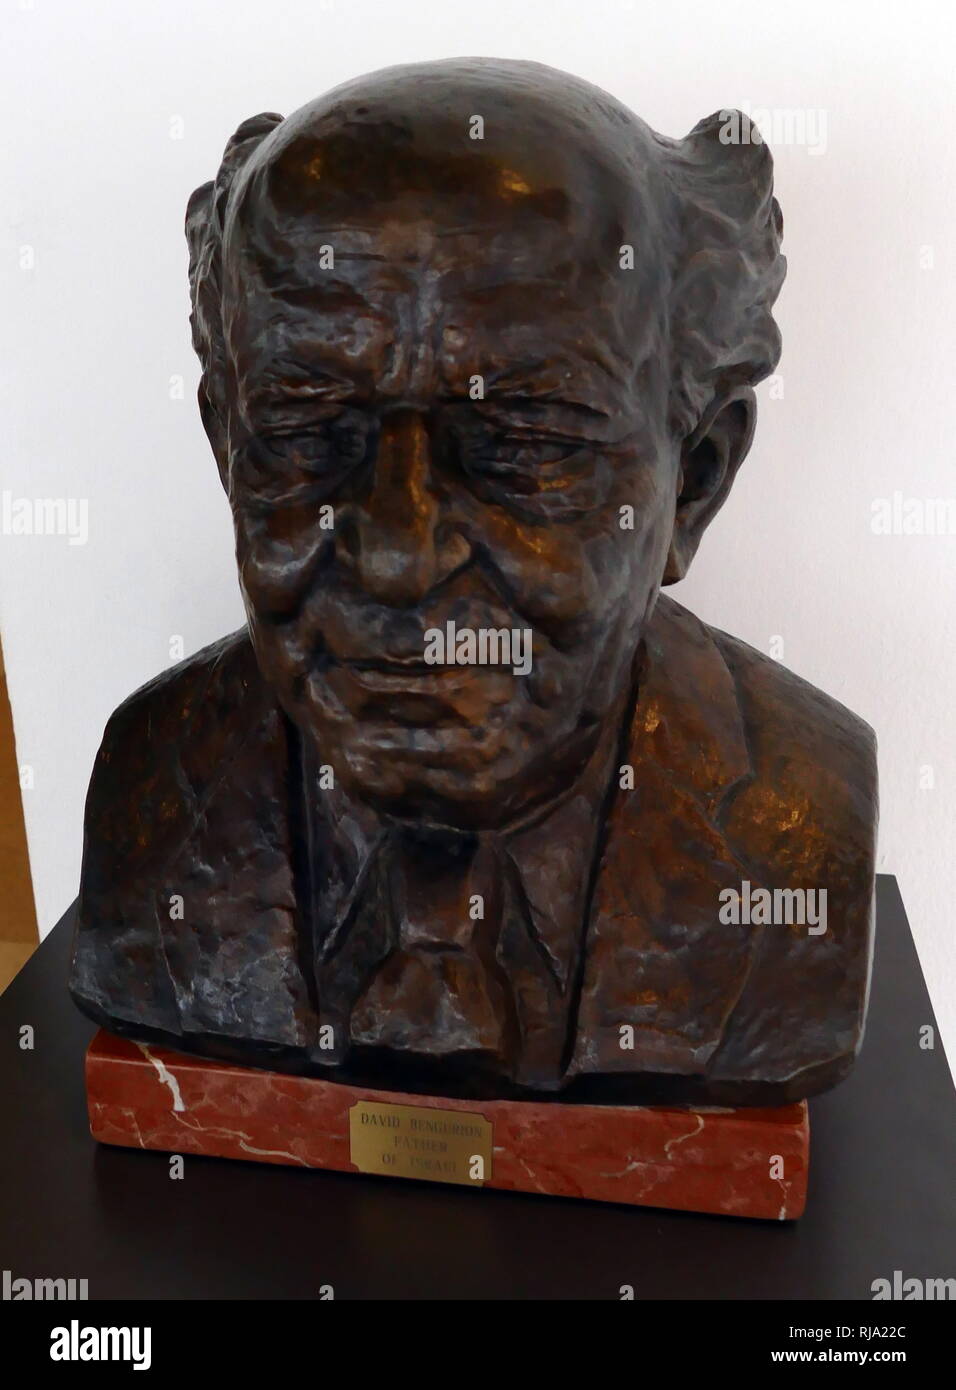 Bronze bust of David Ben-Gurion (1886 - 1973) first Prime Minister of Israel Stock Photo